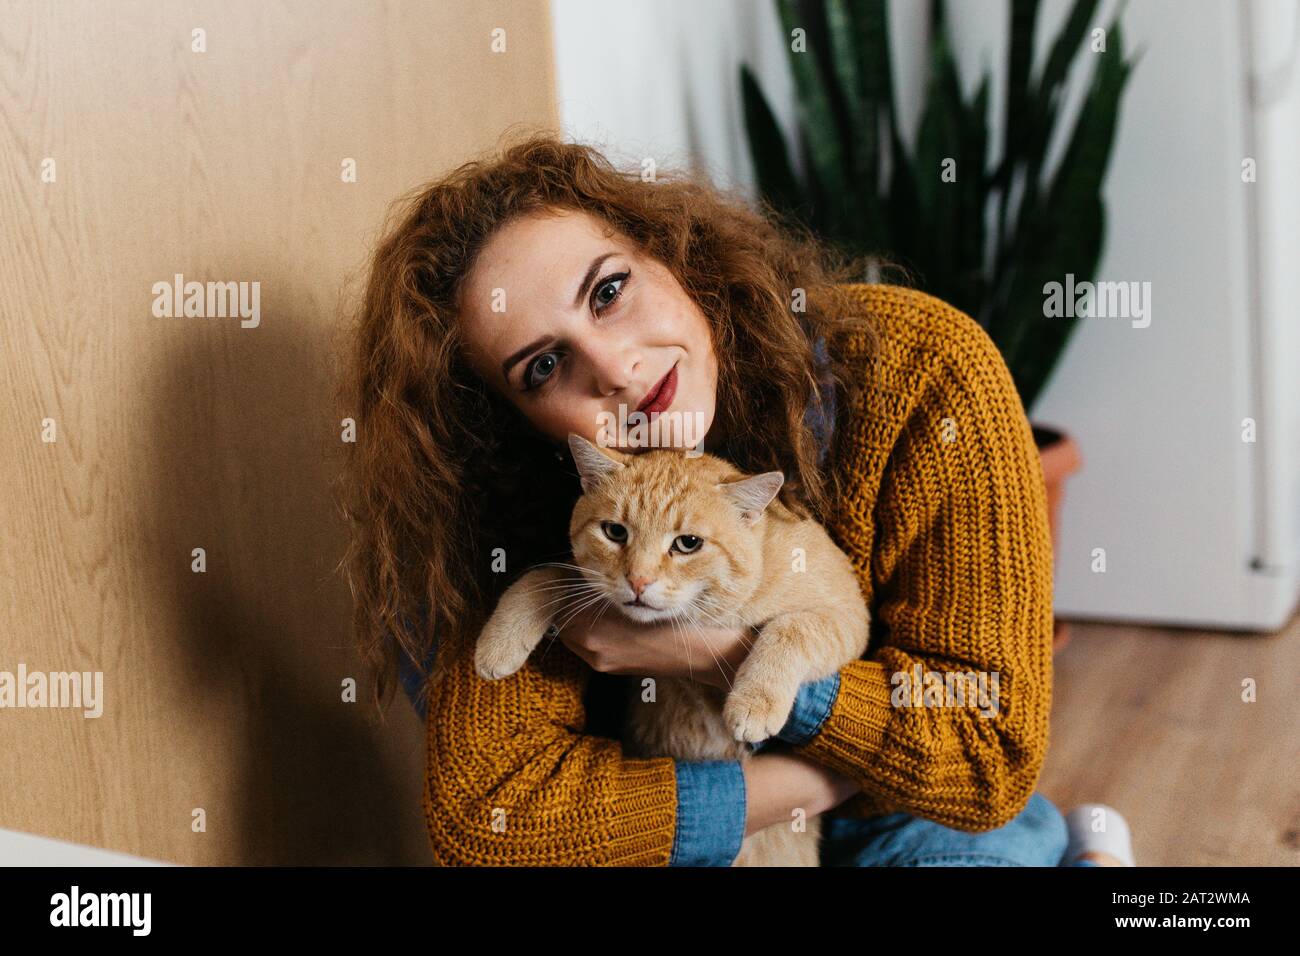 Portrait of beautiful woman with curly hair playing with yellow cat indoors, in house. Stock Photo